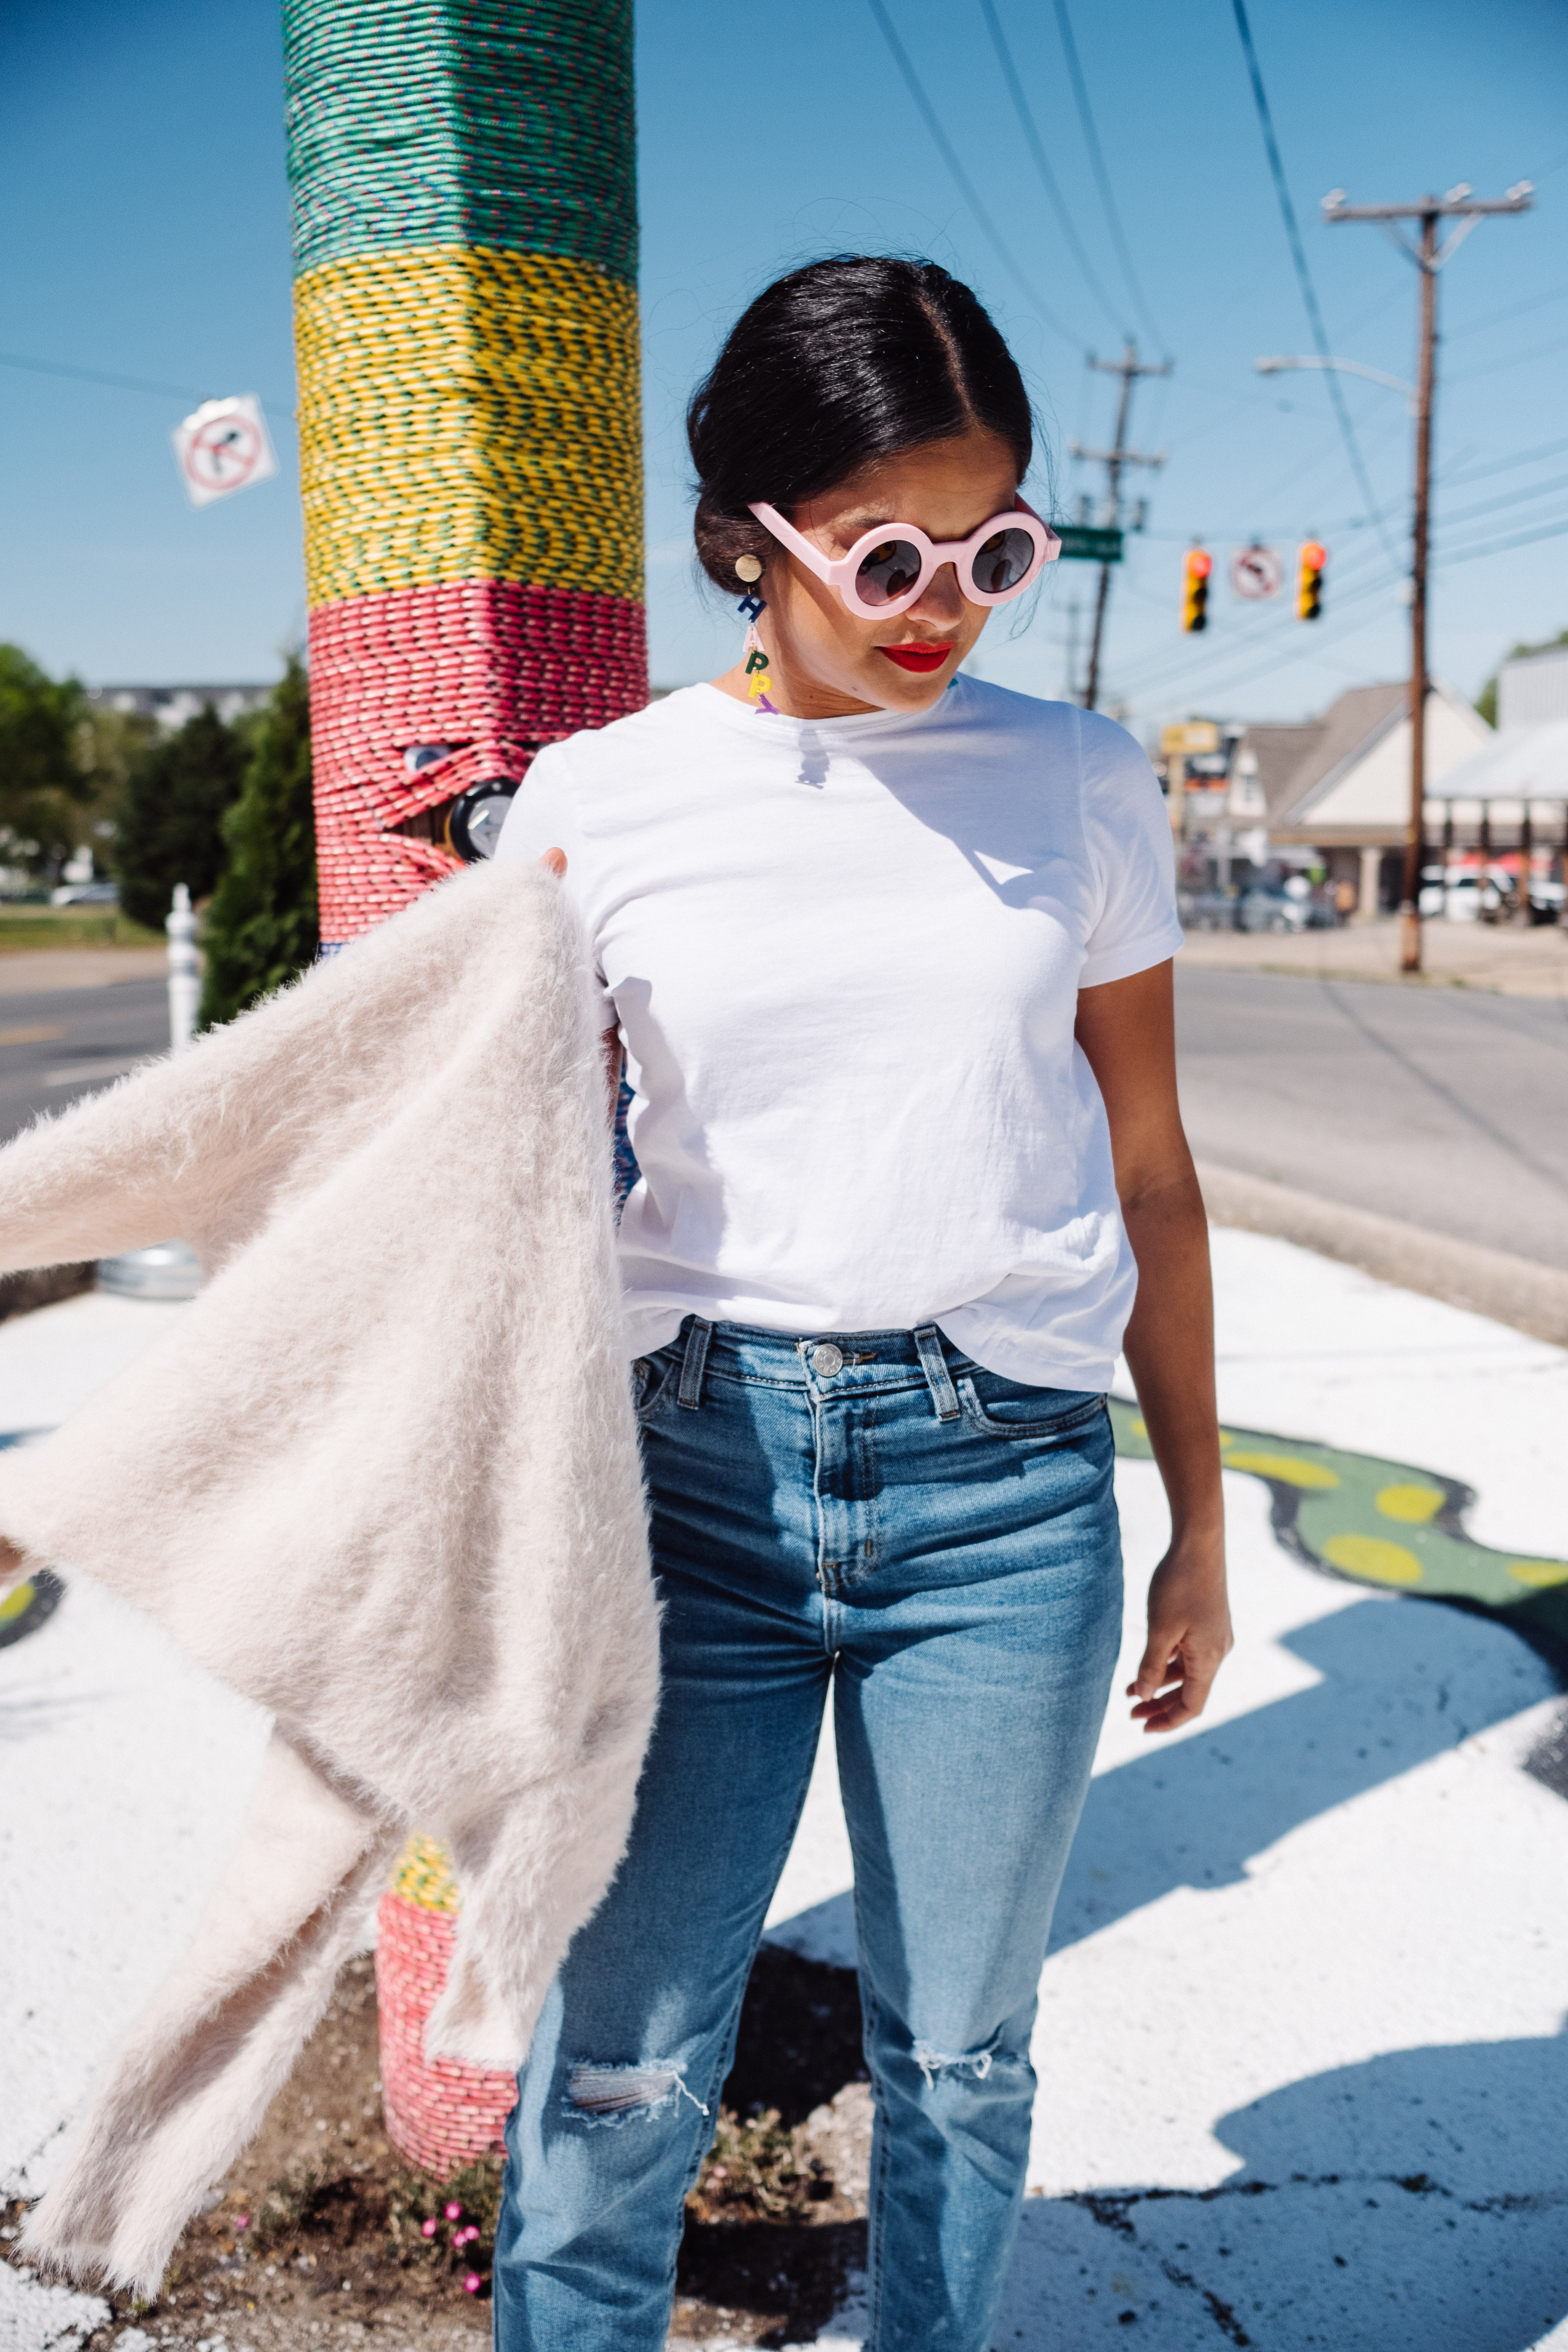 Priya the Blog, Nashville fashion blogger, Nashville fashion blog, Nashville style blogger, Nashville style blog, ban.do Happy Hour earrings, Happy Hour earrings, Spring outfit, red orange lip, girlfriend jeans, Urban Outfitter's girlfriend jeans, Spring outfit with girlfriend jeans, ban.do, ban.do pink circle sunglasses, fuzzy cardigan, Superga trainers